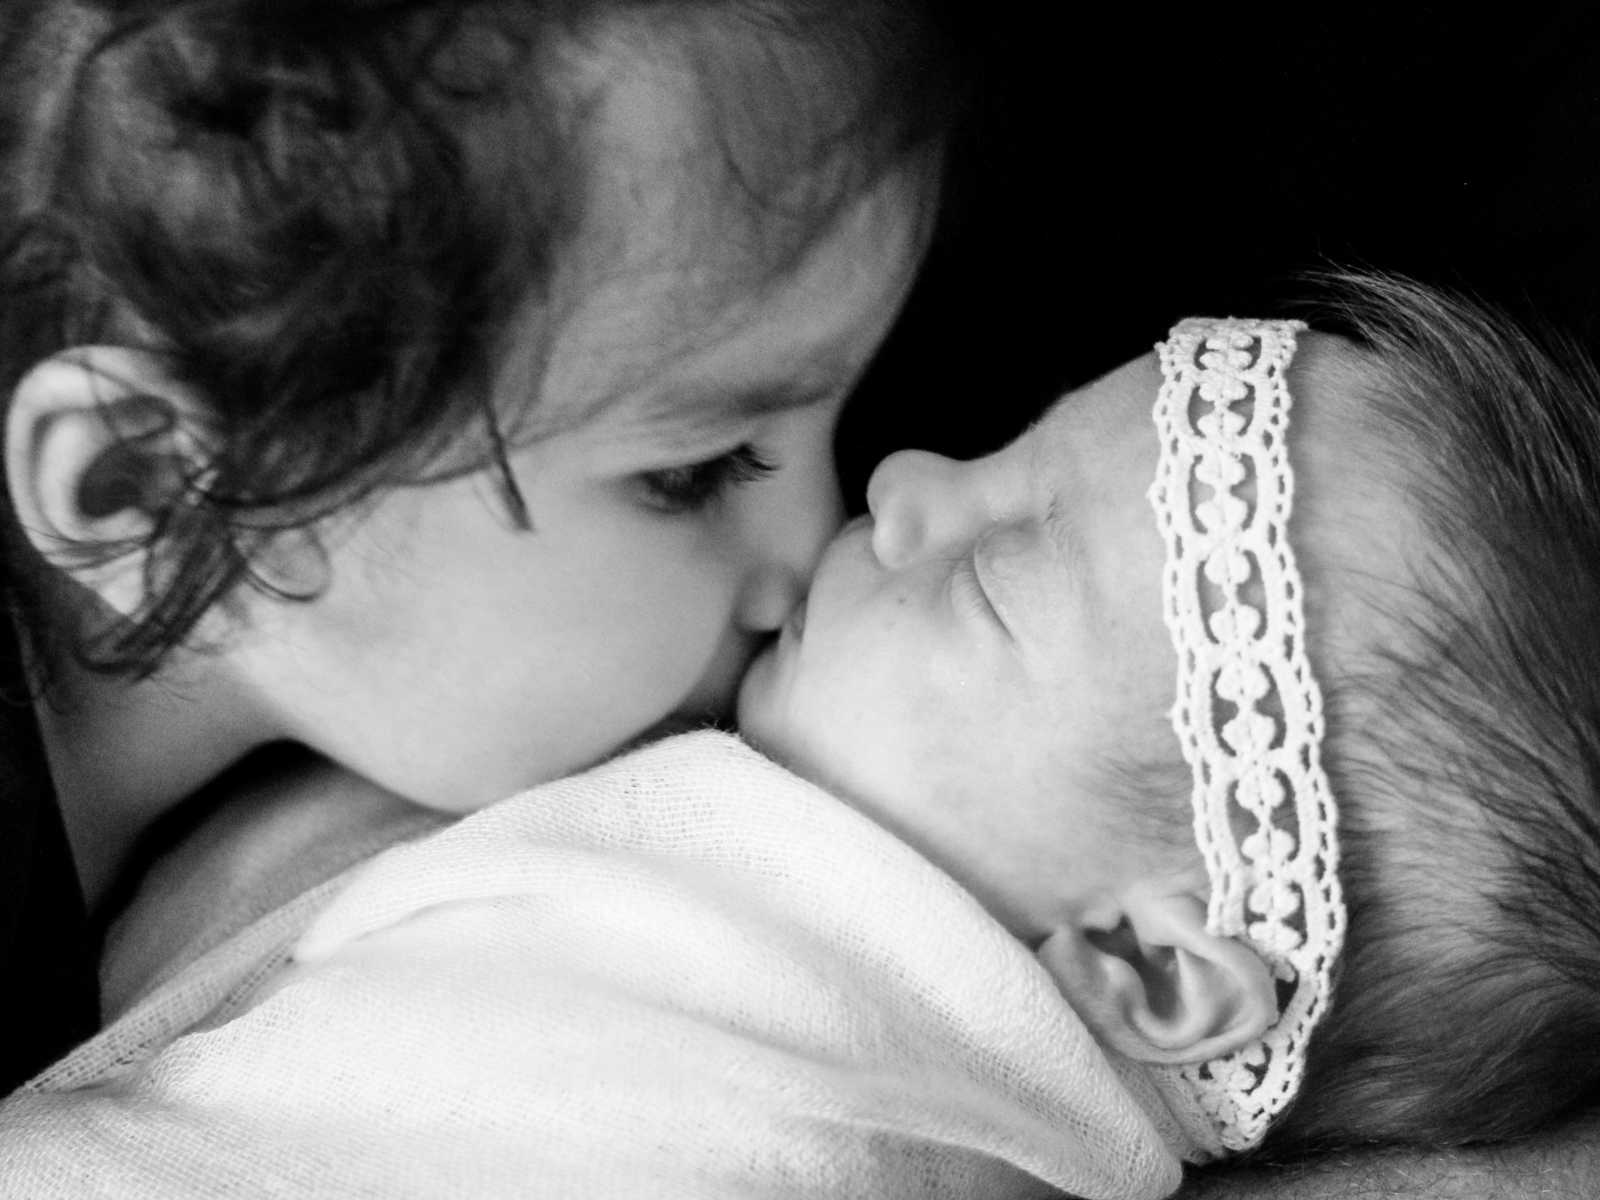 Adopted first child kisses newborn sister on the chin